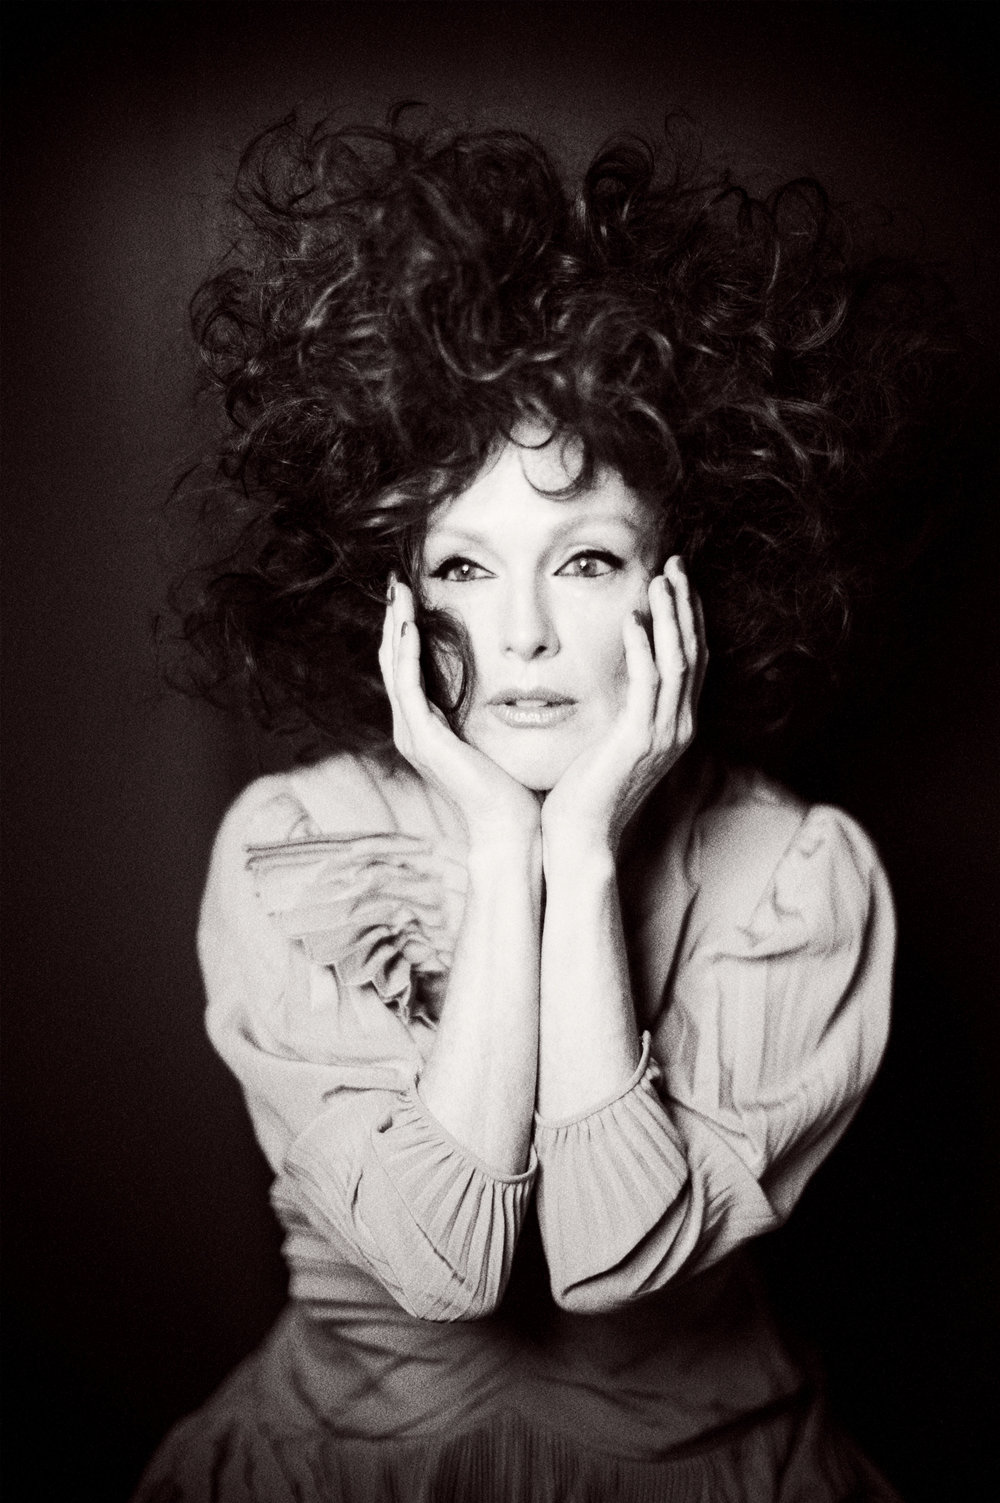 Julianne Moore covers Flaunt Magazine Issue 164 by ioulex